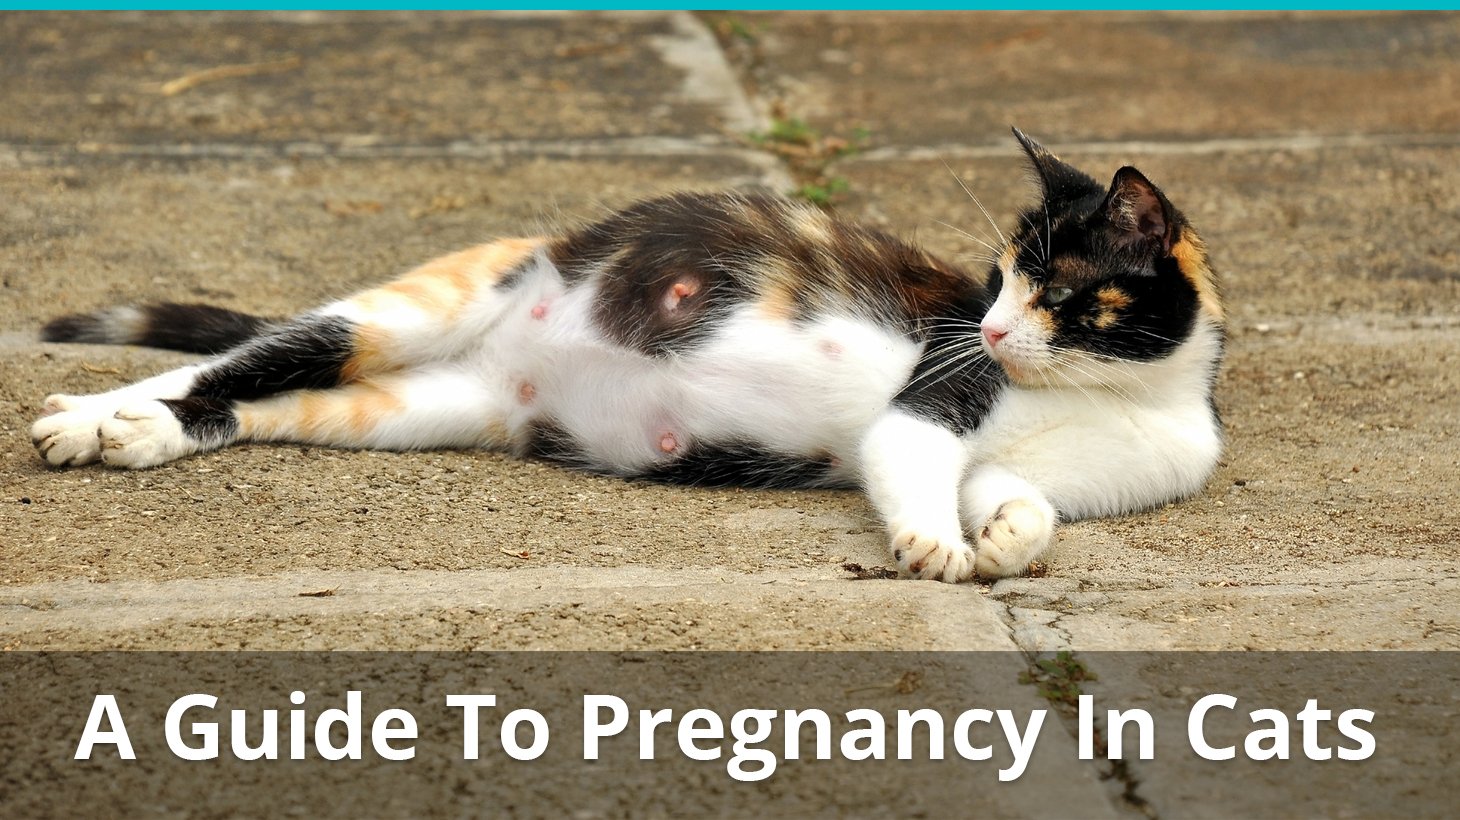 cats pregnant for how long